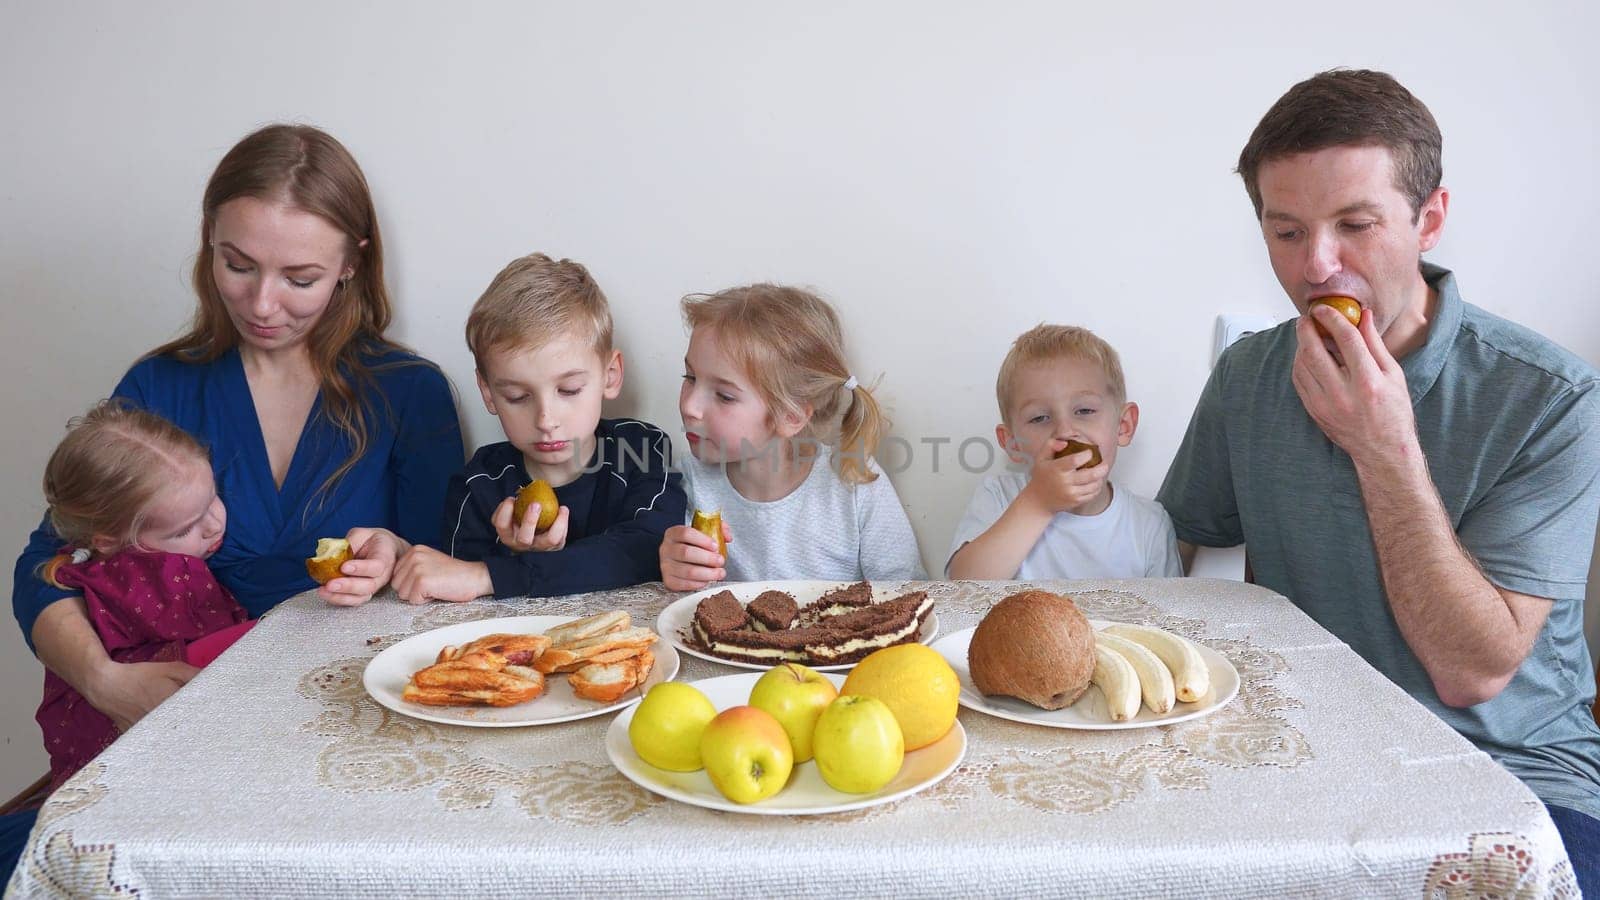 A large and friendly family has lunch at home